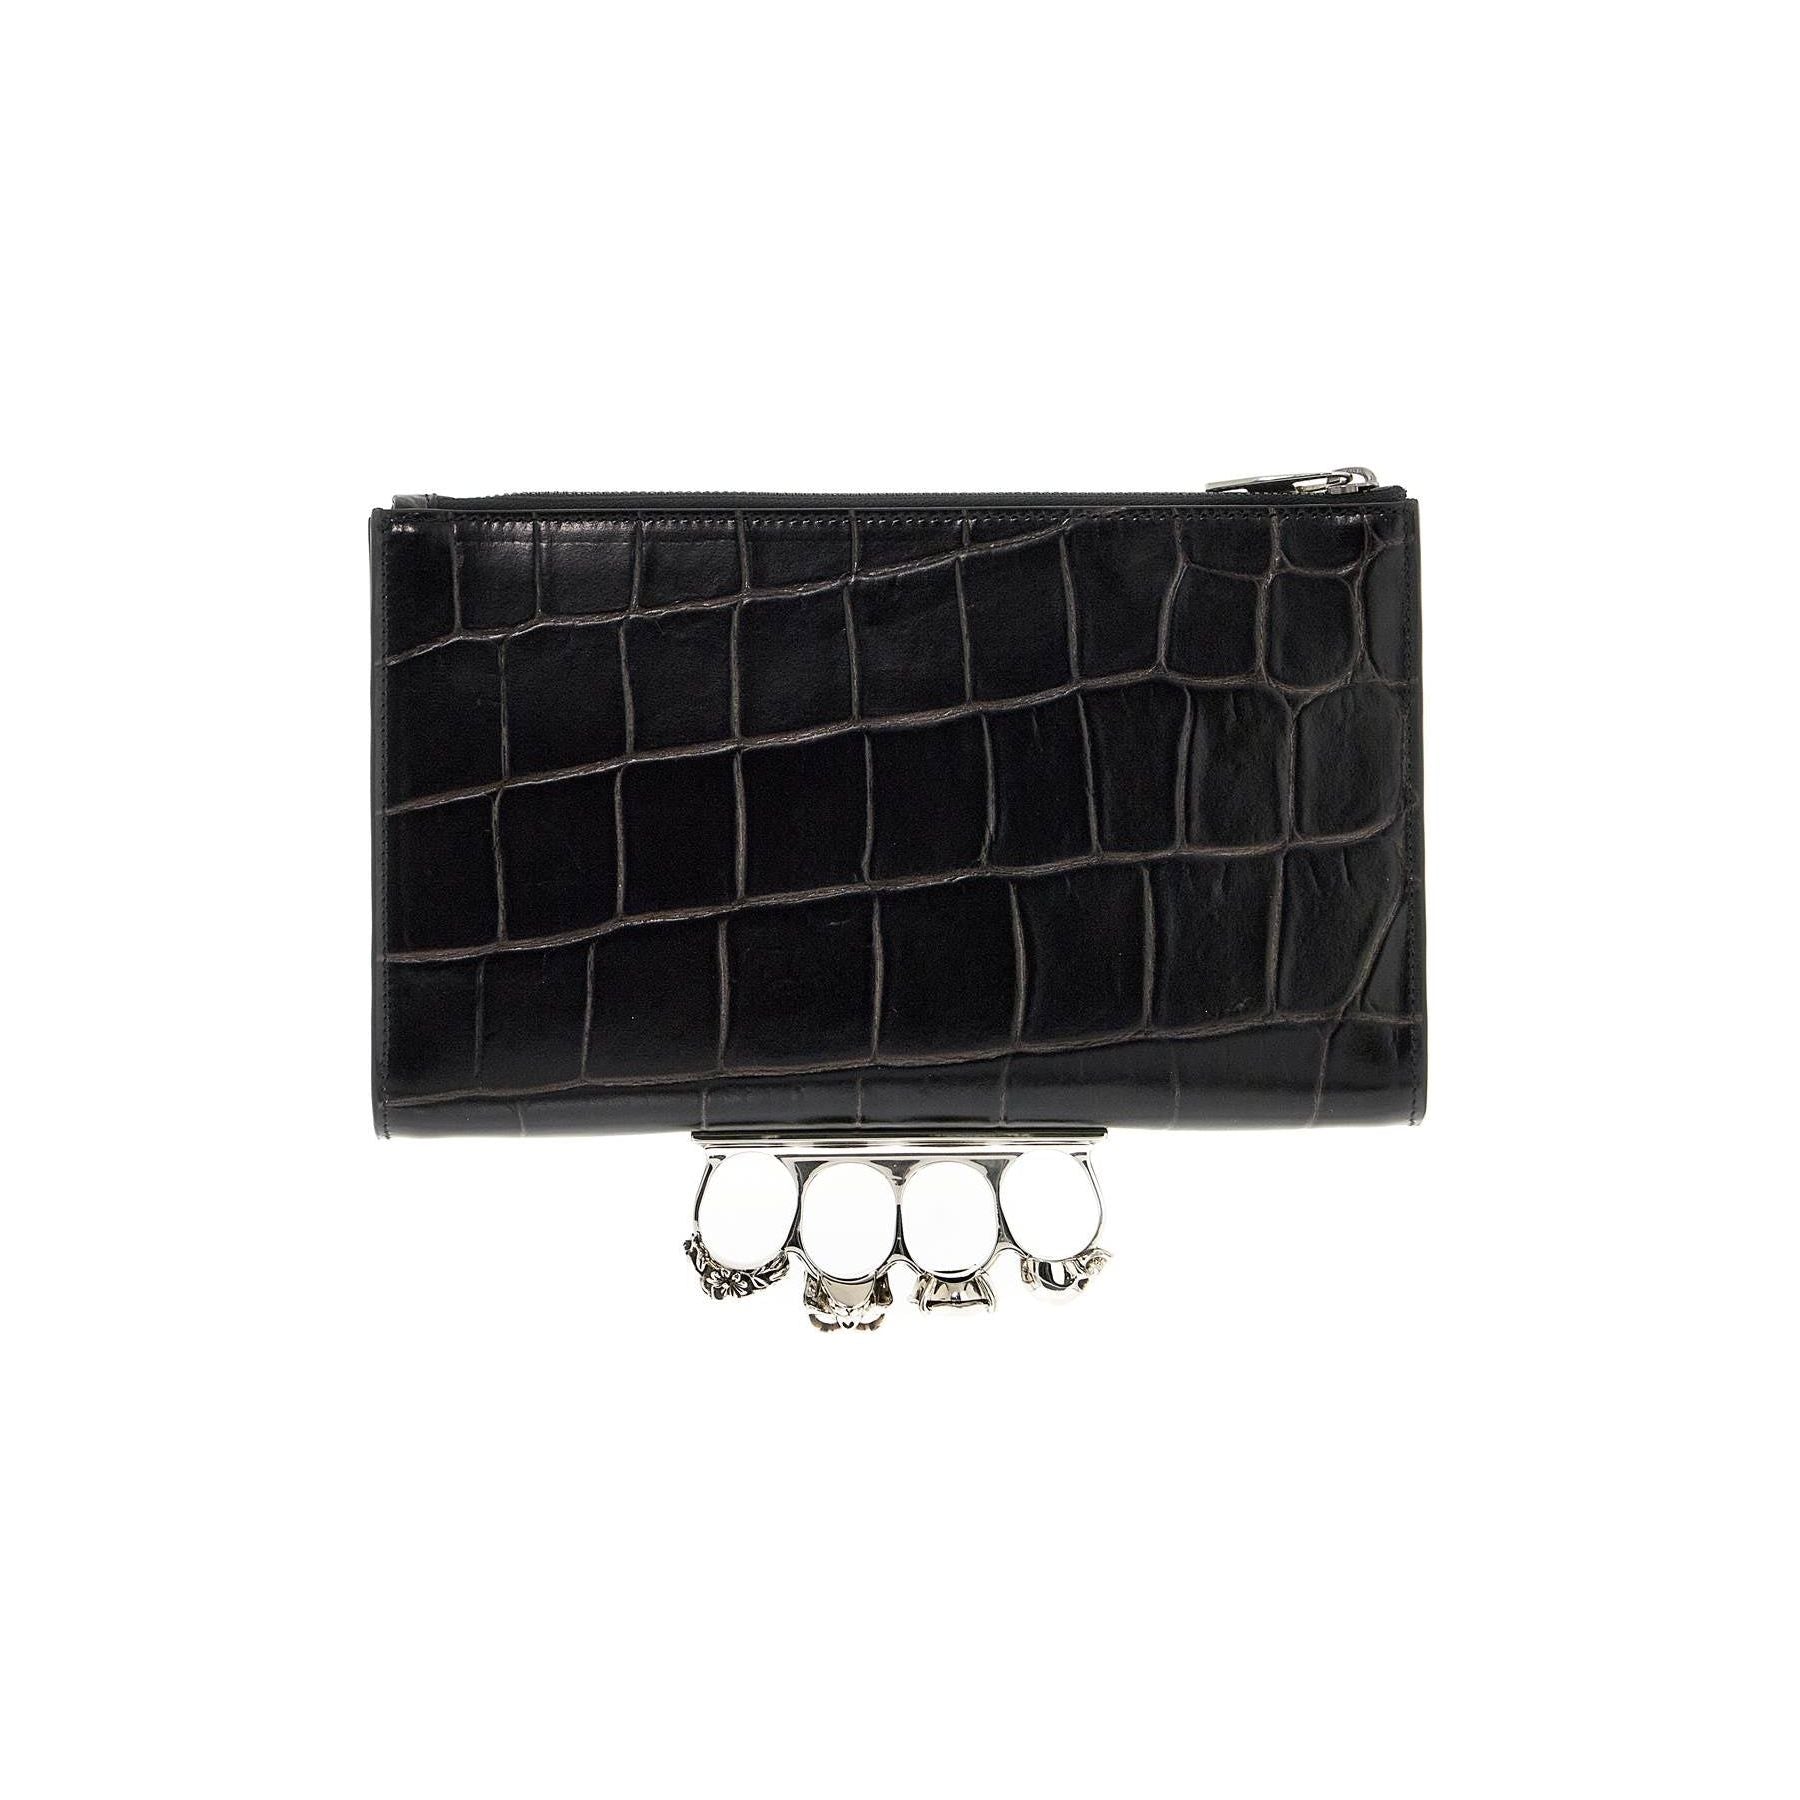 The Knuckle Small Croc Embossed Leather Zip Pouch